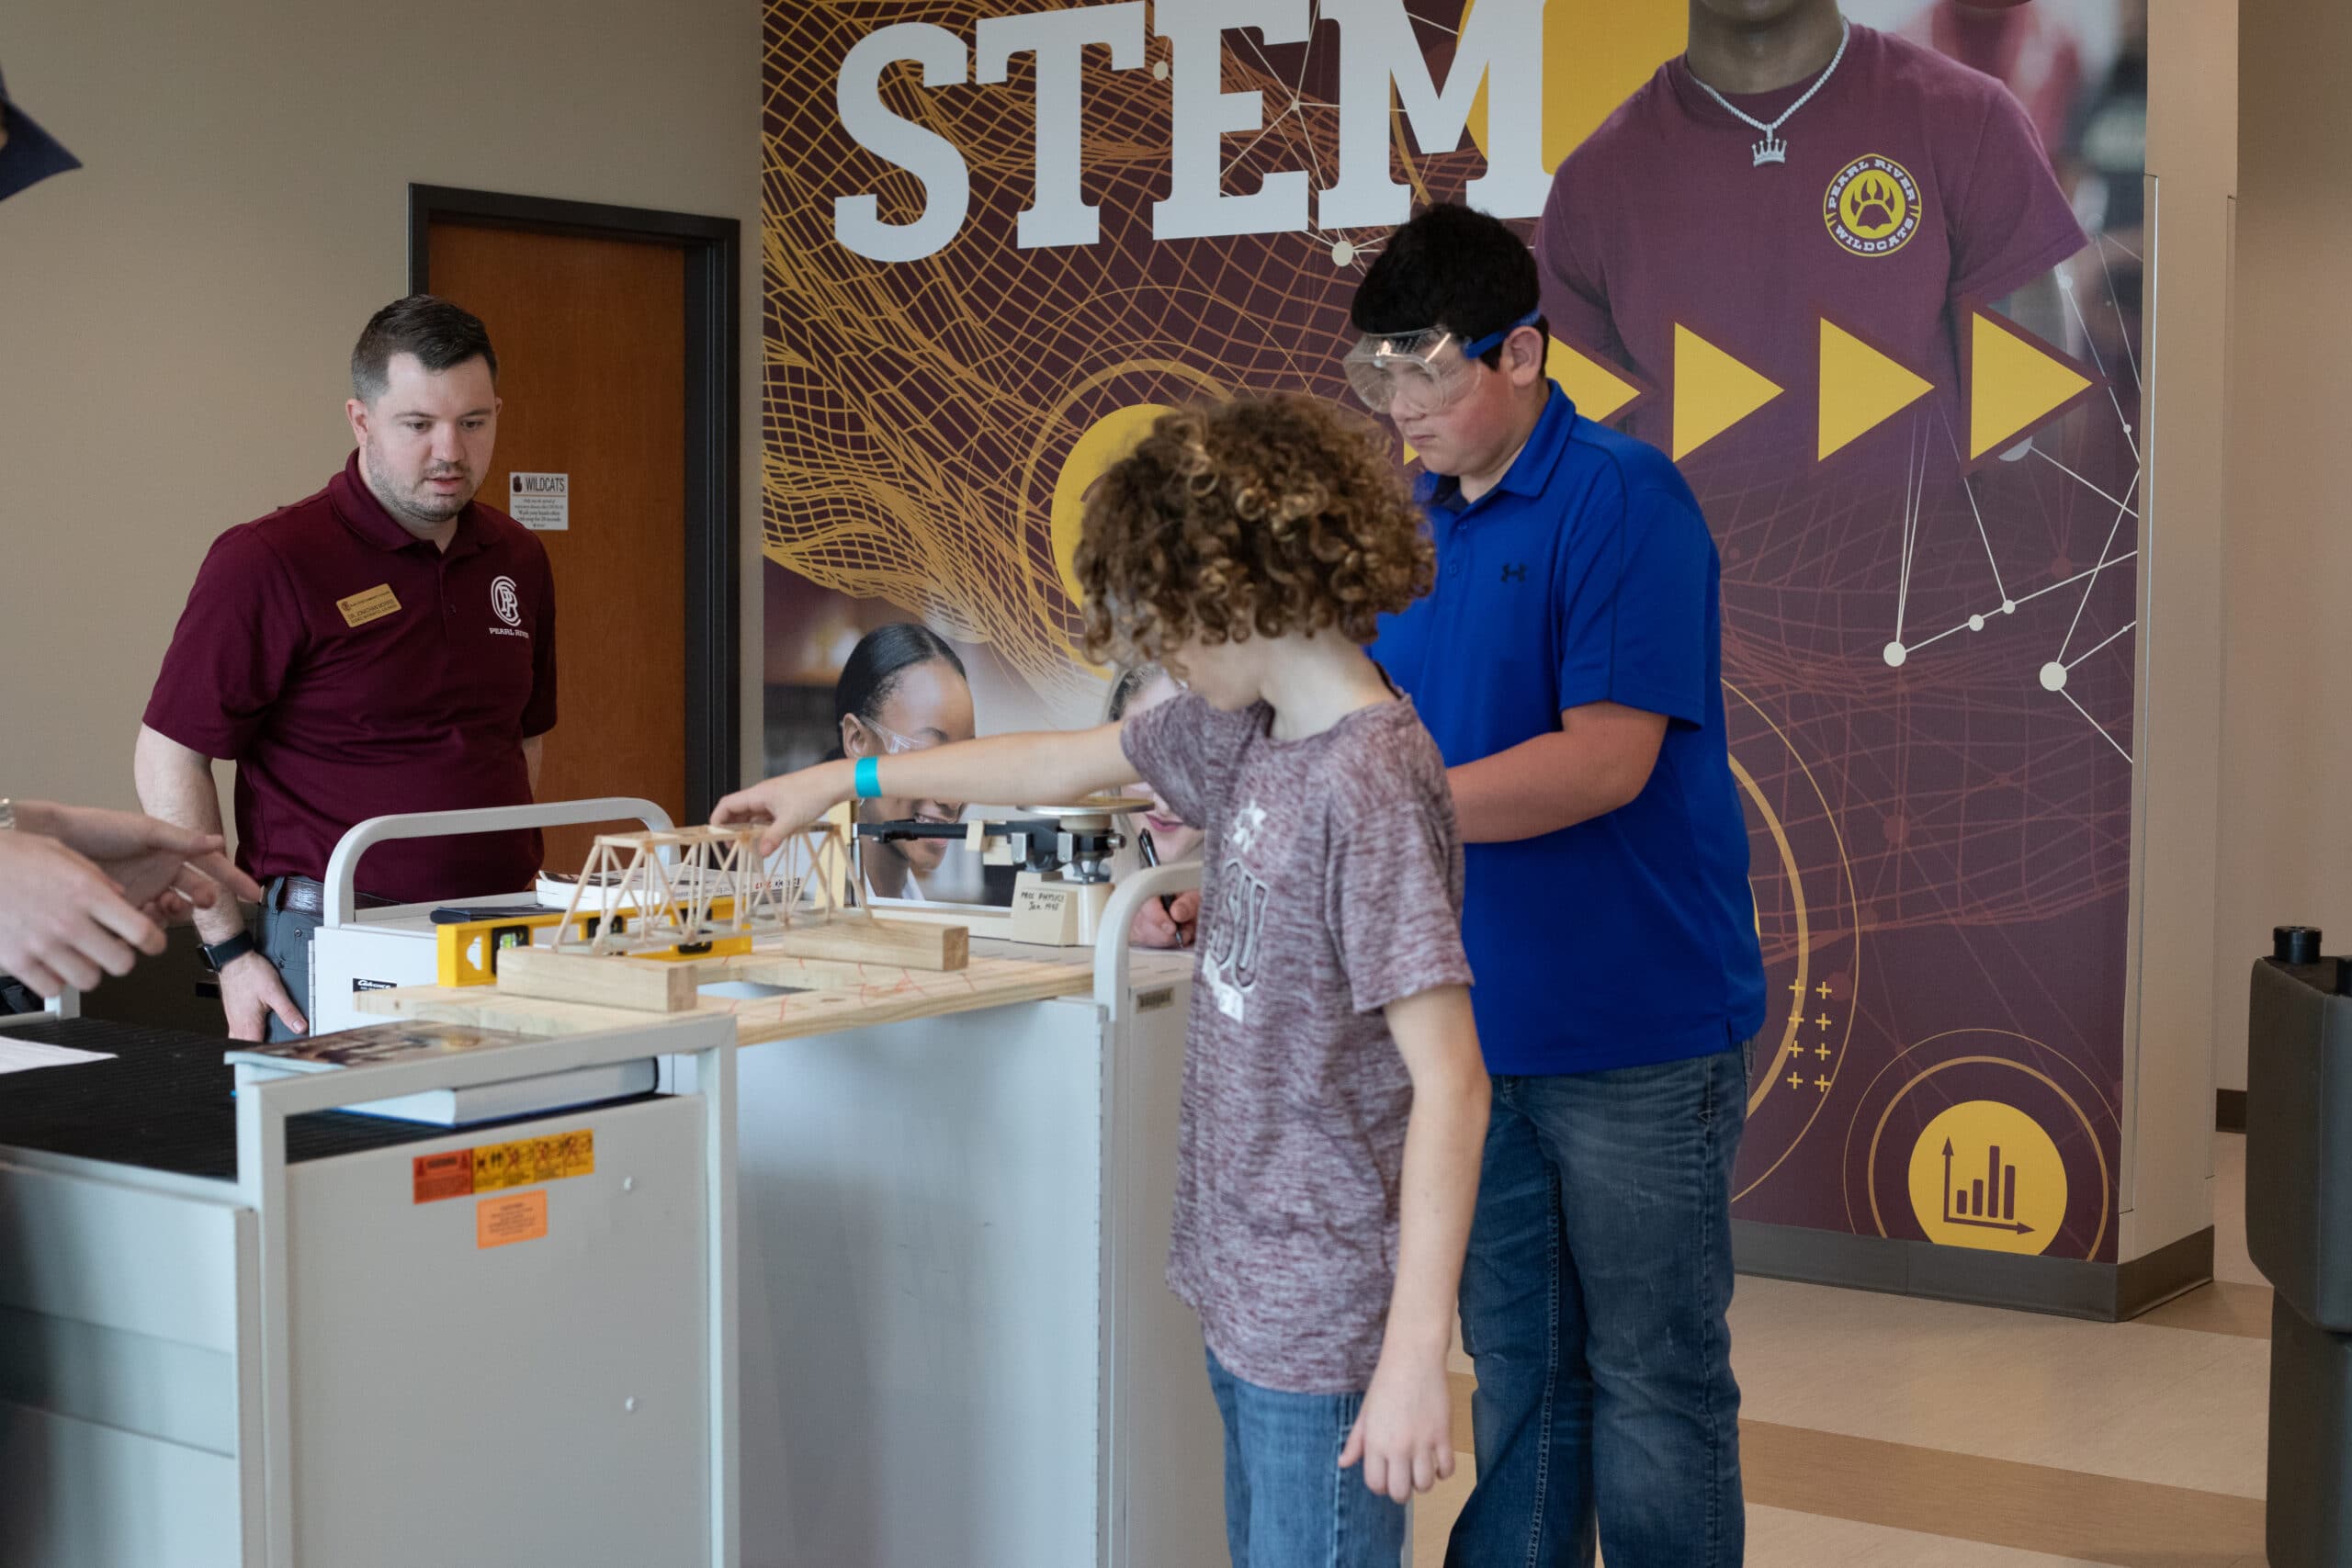 PRC Middle School students Griff Bowen and Carter Kirby set up their bridge while PRCC Math Instructor Jonathan Morris observes